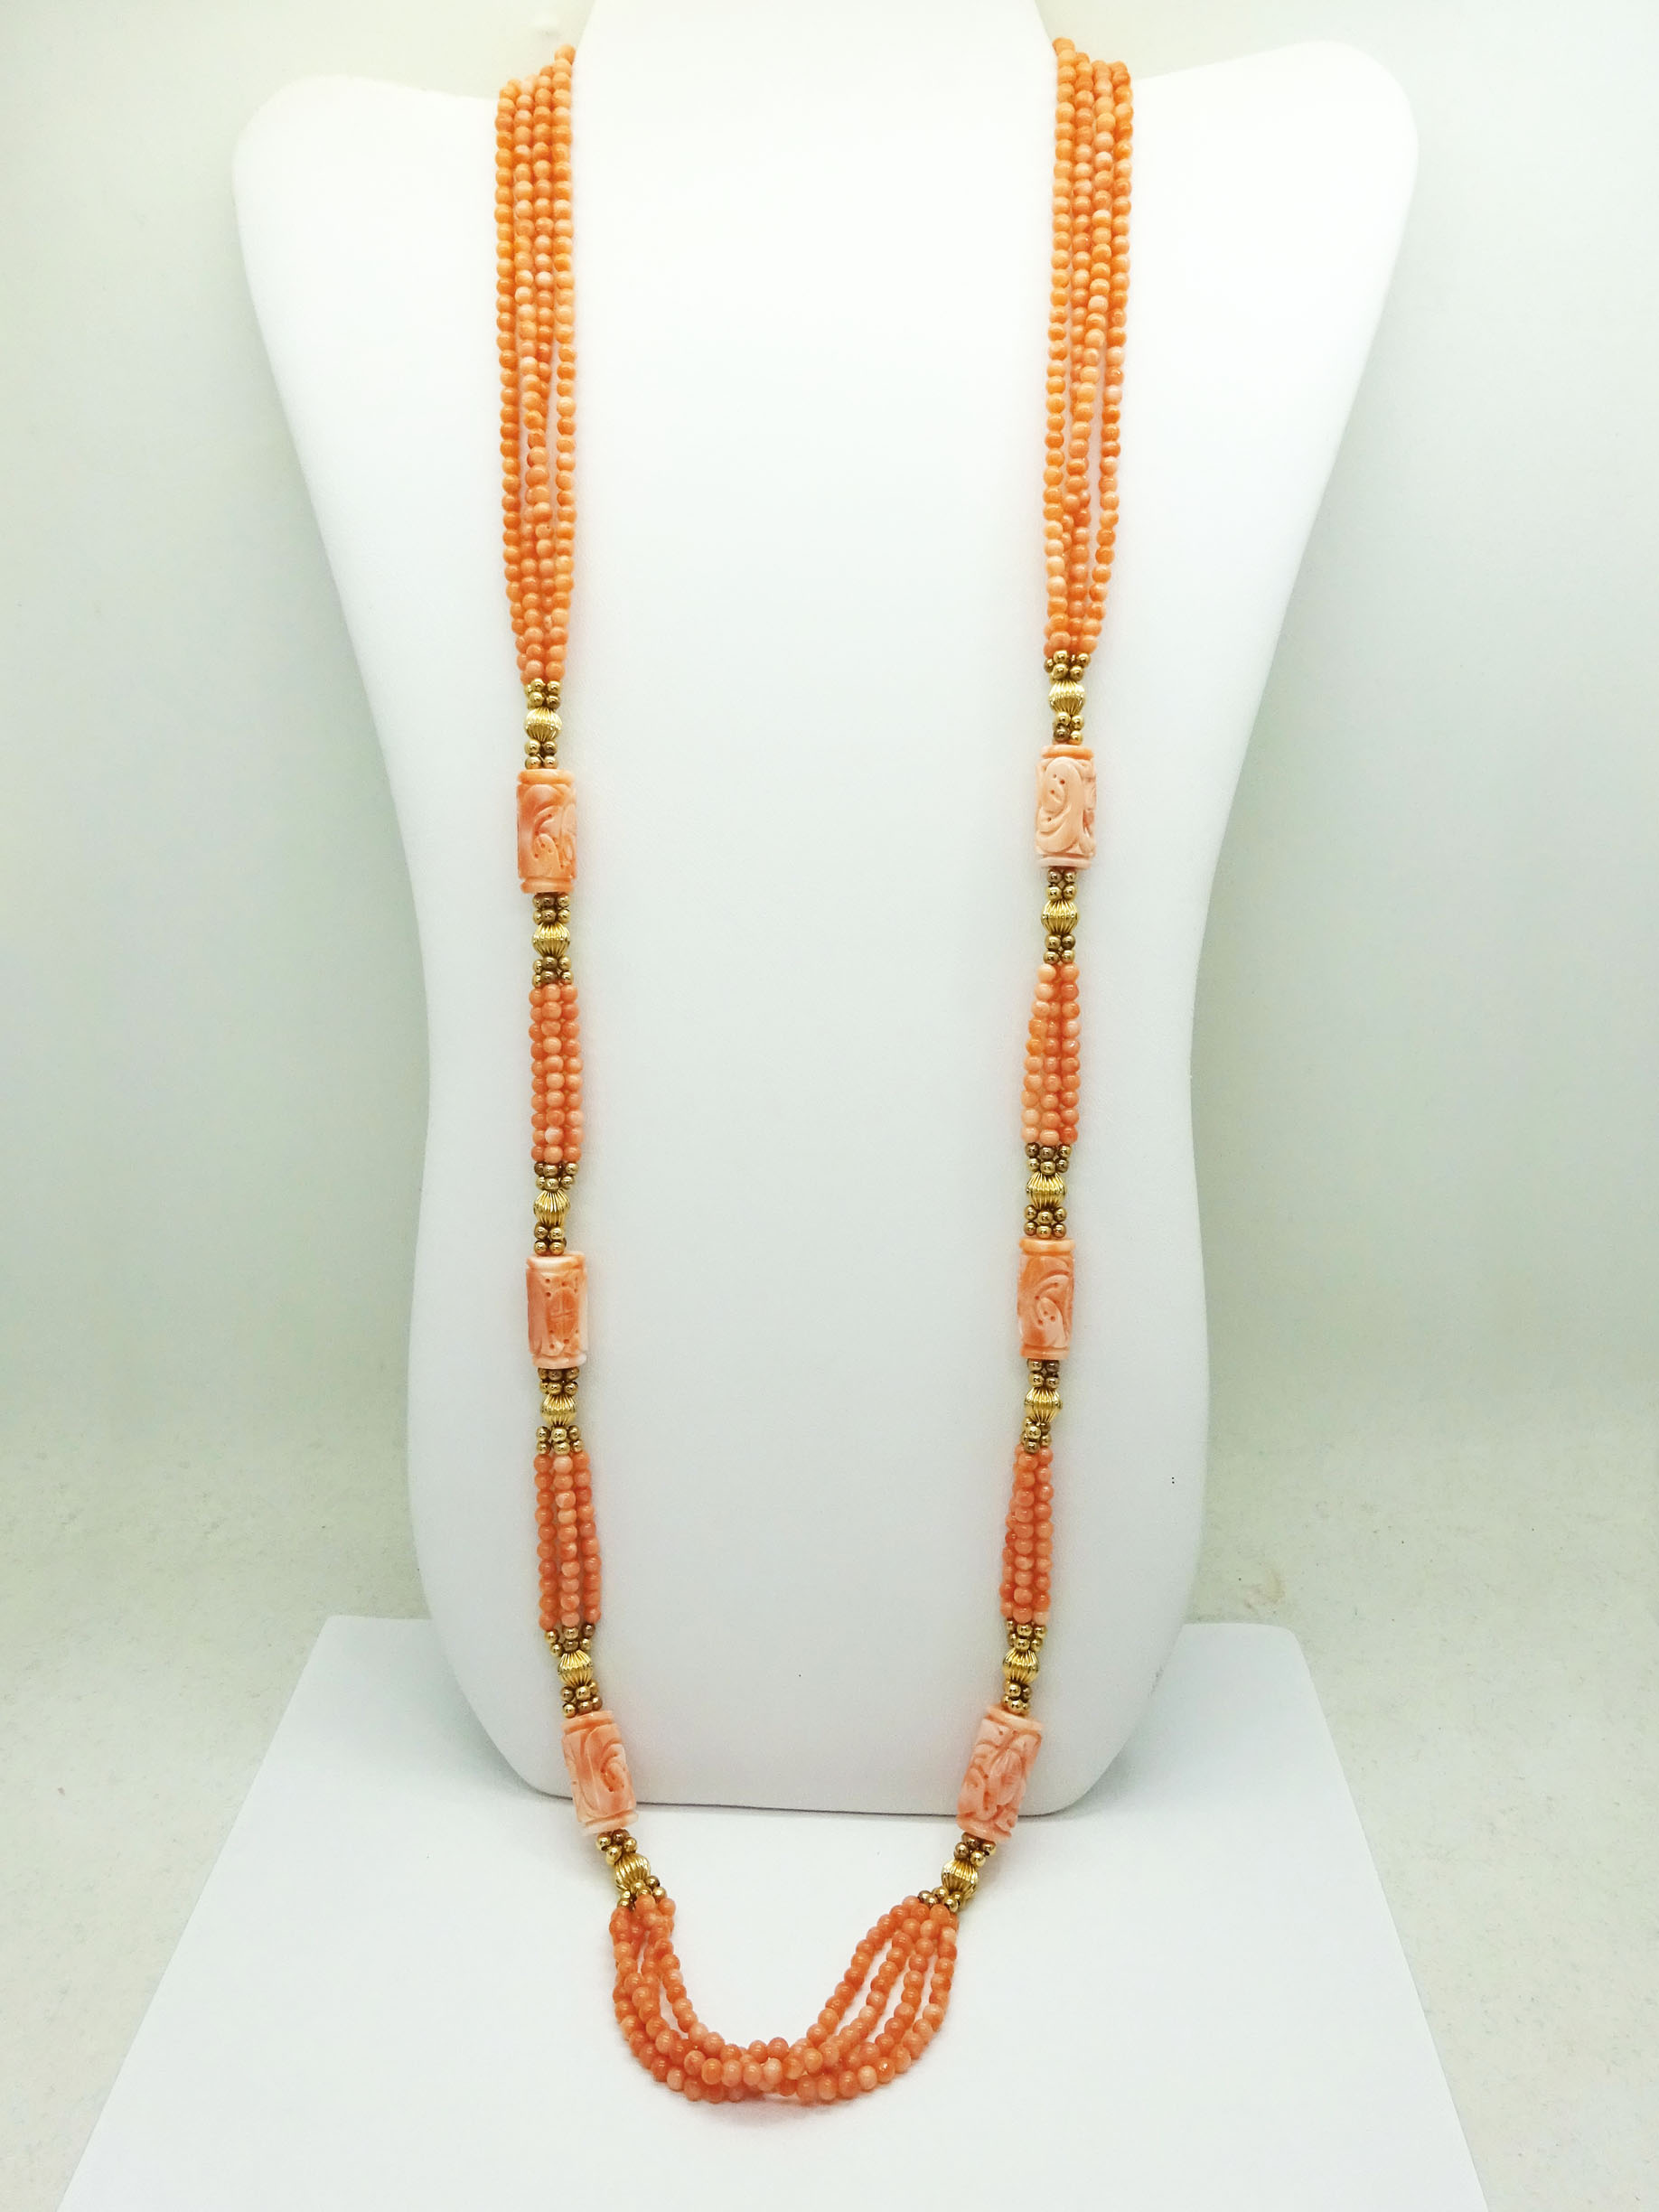 Vintage Sttunning Graduated Dual Strand Salmon Orange Coral Bead Necklace  W/ Etched 14k Yellow Gold Clasp With Original Patina - Etsy